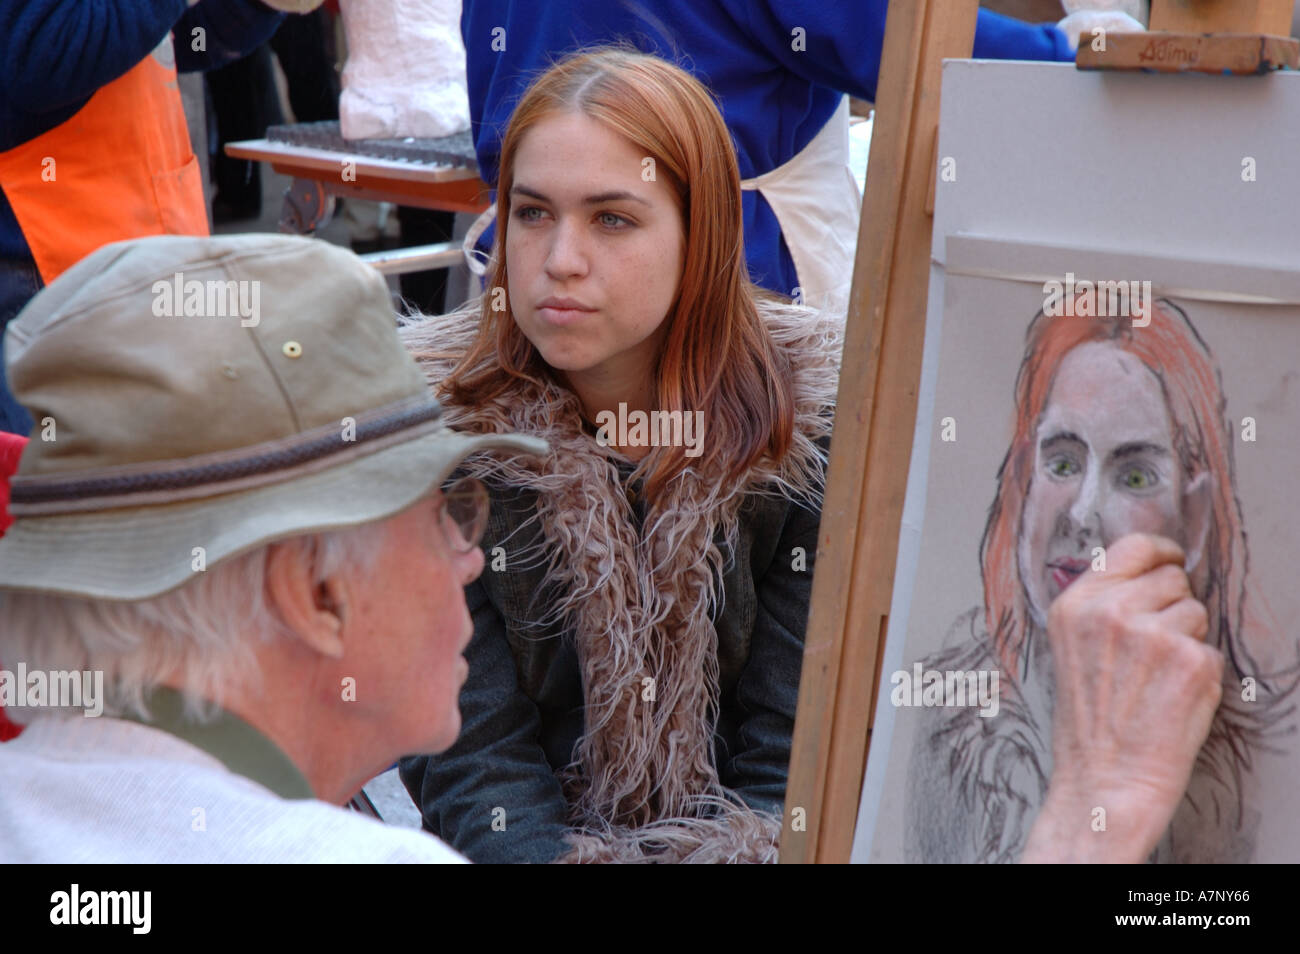 Bad portrait - this young lady in Amsterdam will get a surprise when she sees the finished drawing Stock Photo